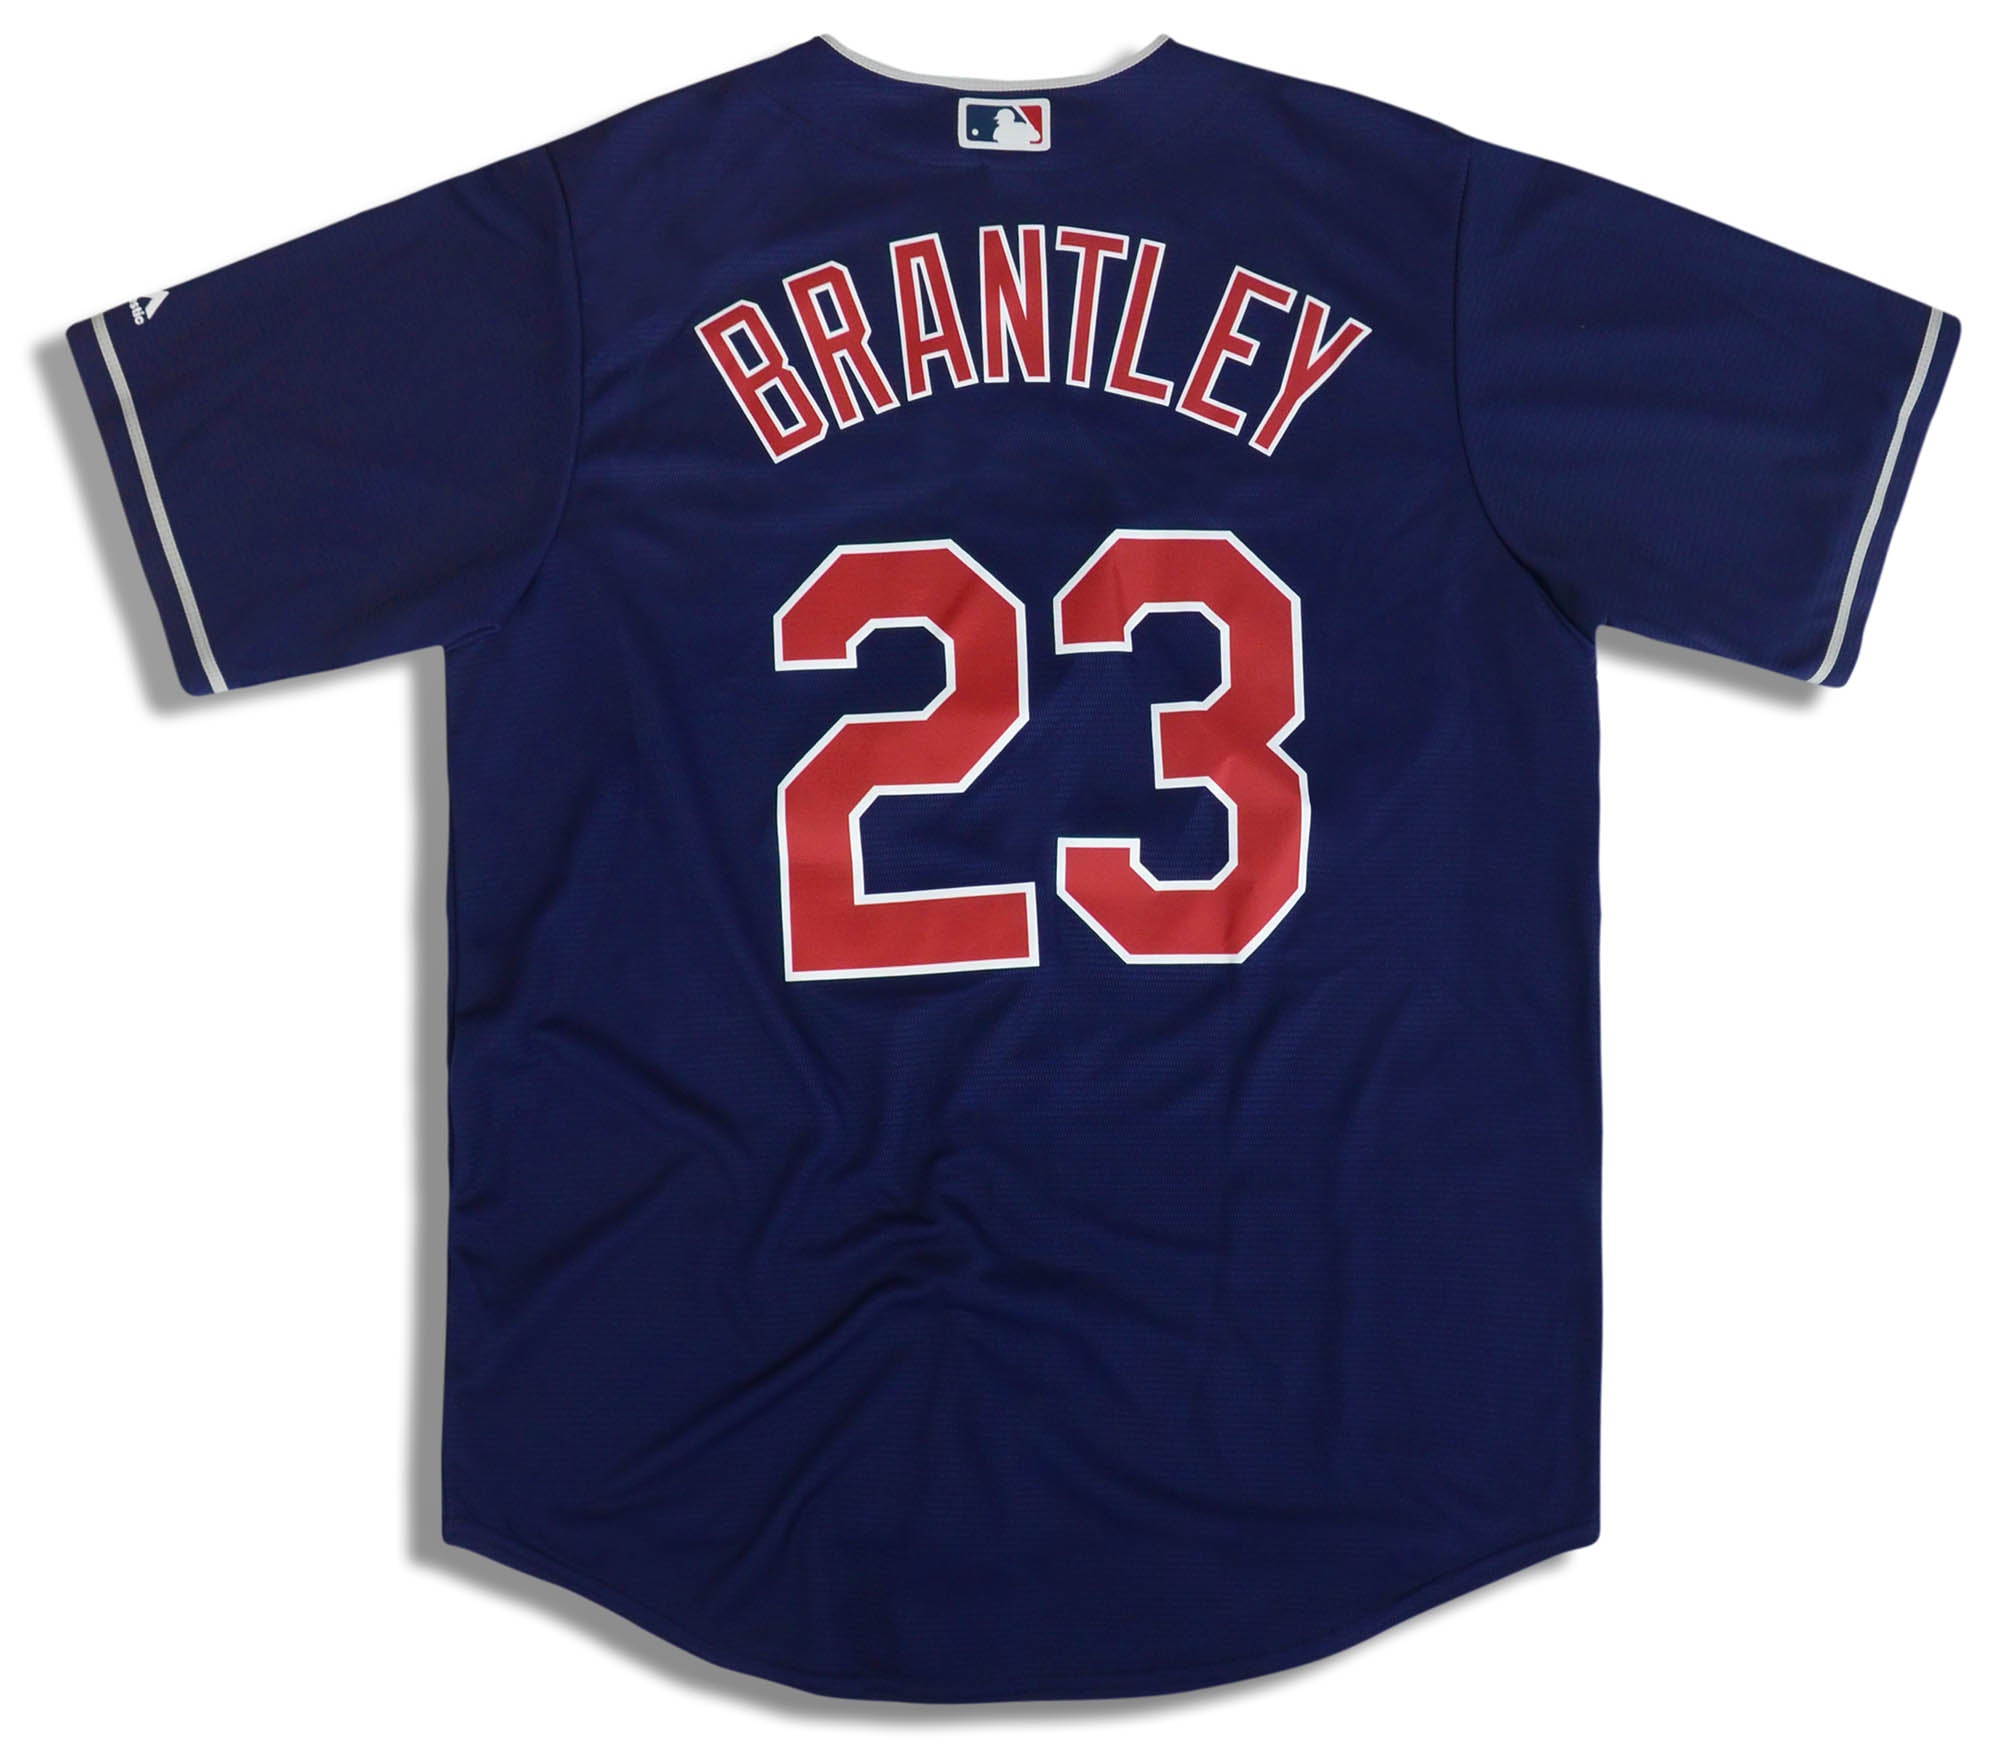 2018 CLEVELAND INDIANS BRANTLEY #23 MAJESTIC COOL BASE JERSEY (ALTERNATE) M - W/TAGS